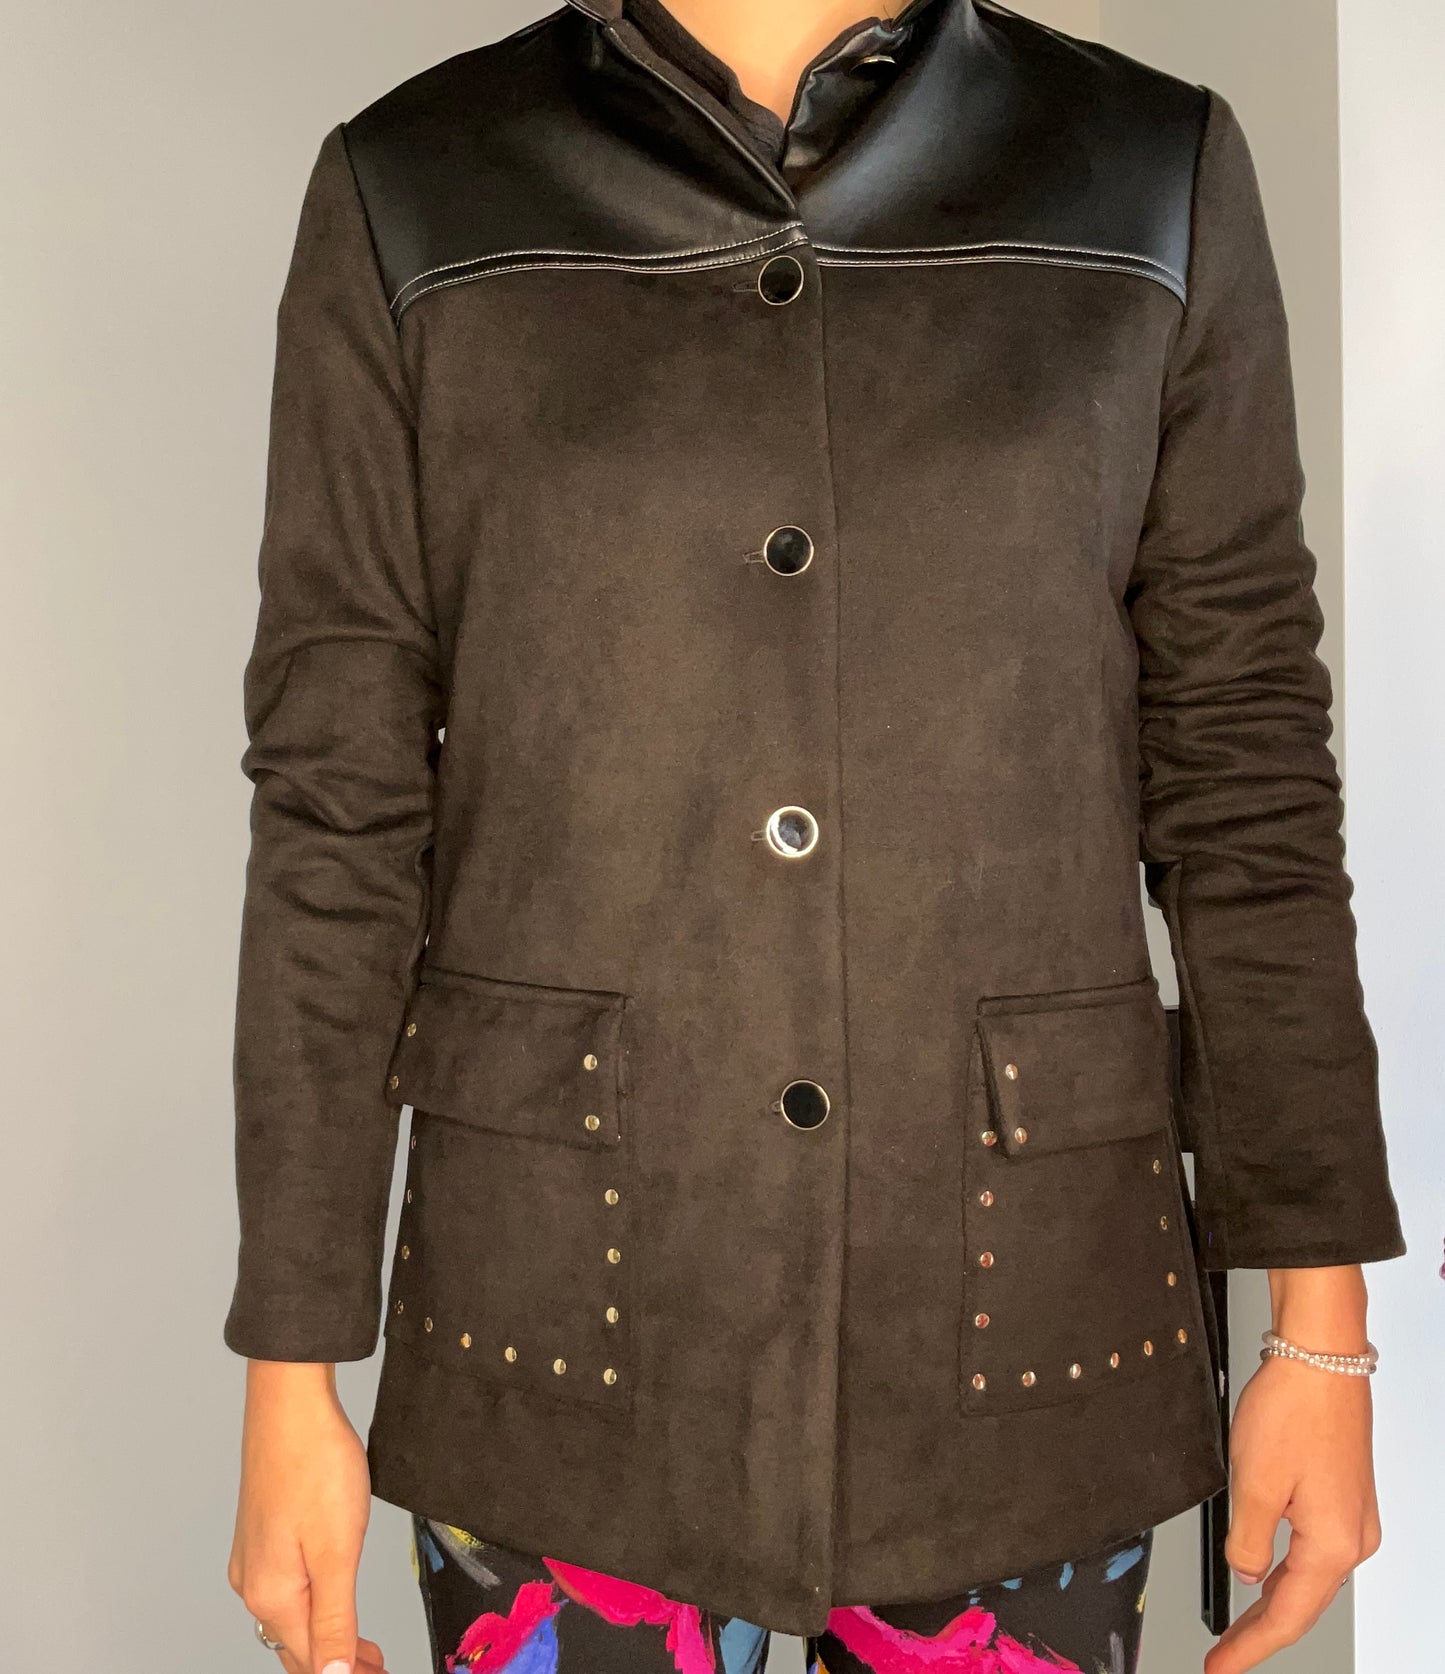 MICROSUEDE AND FAUX LEATHER JACKET